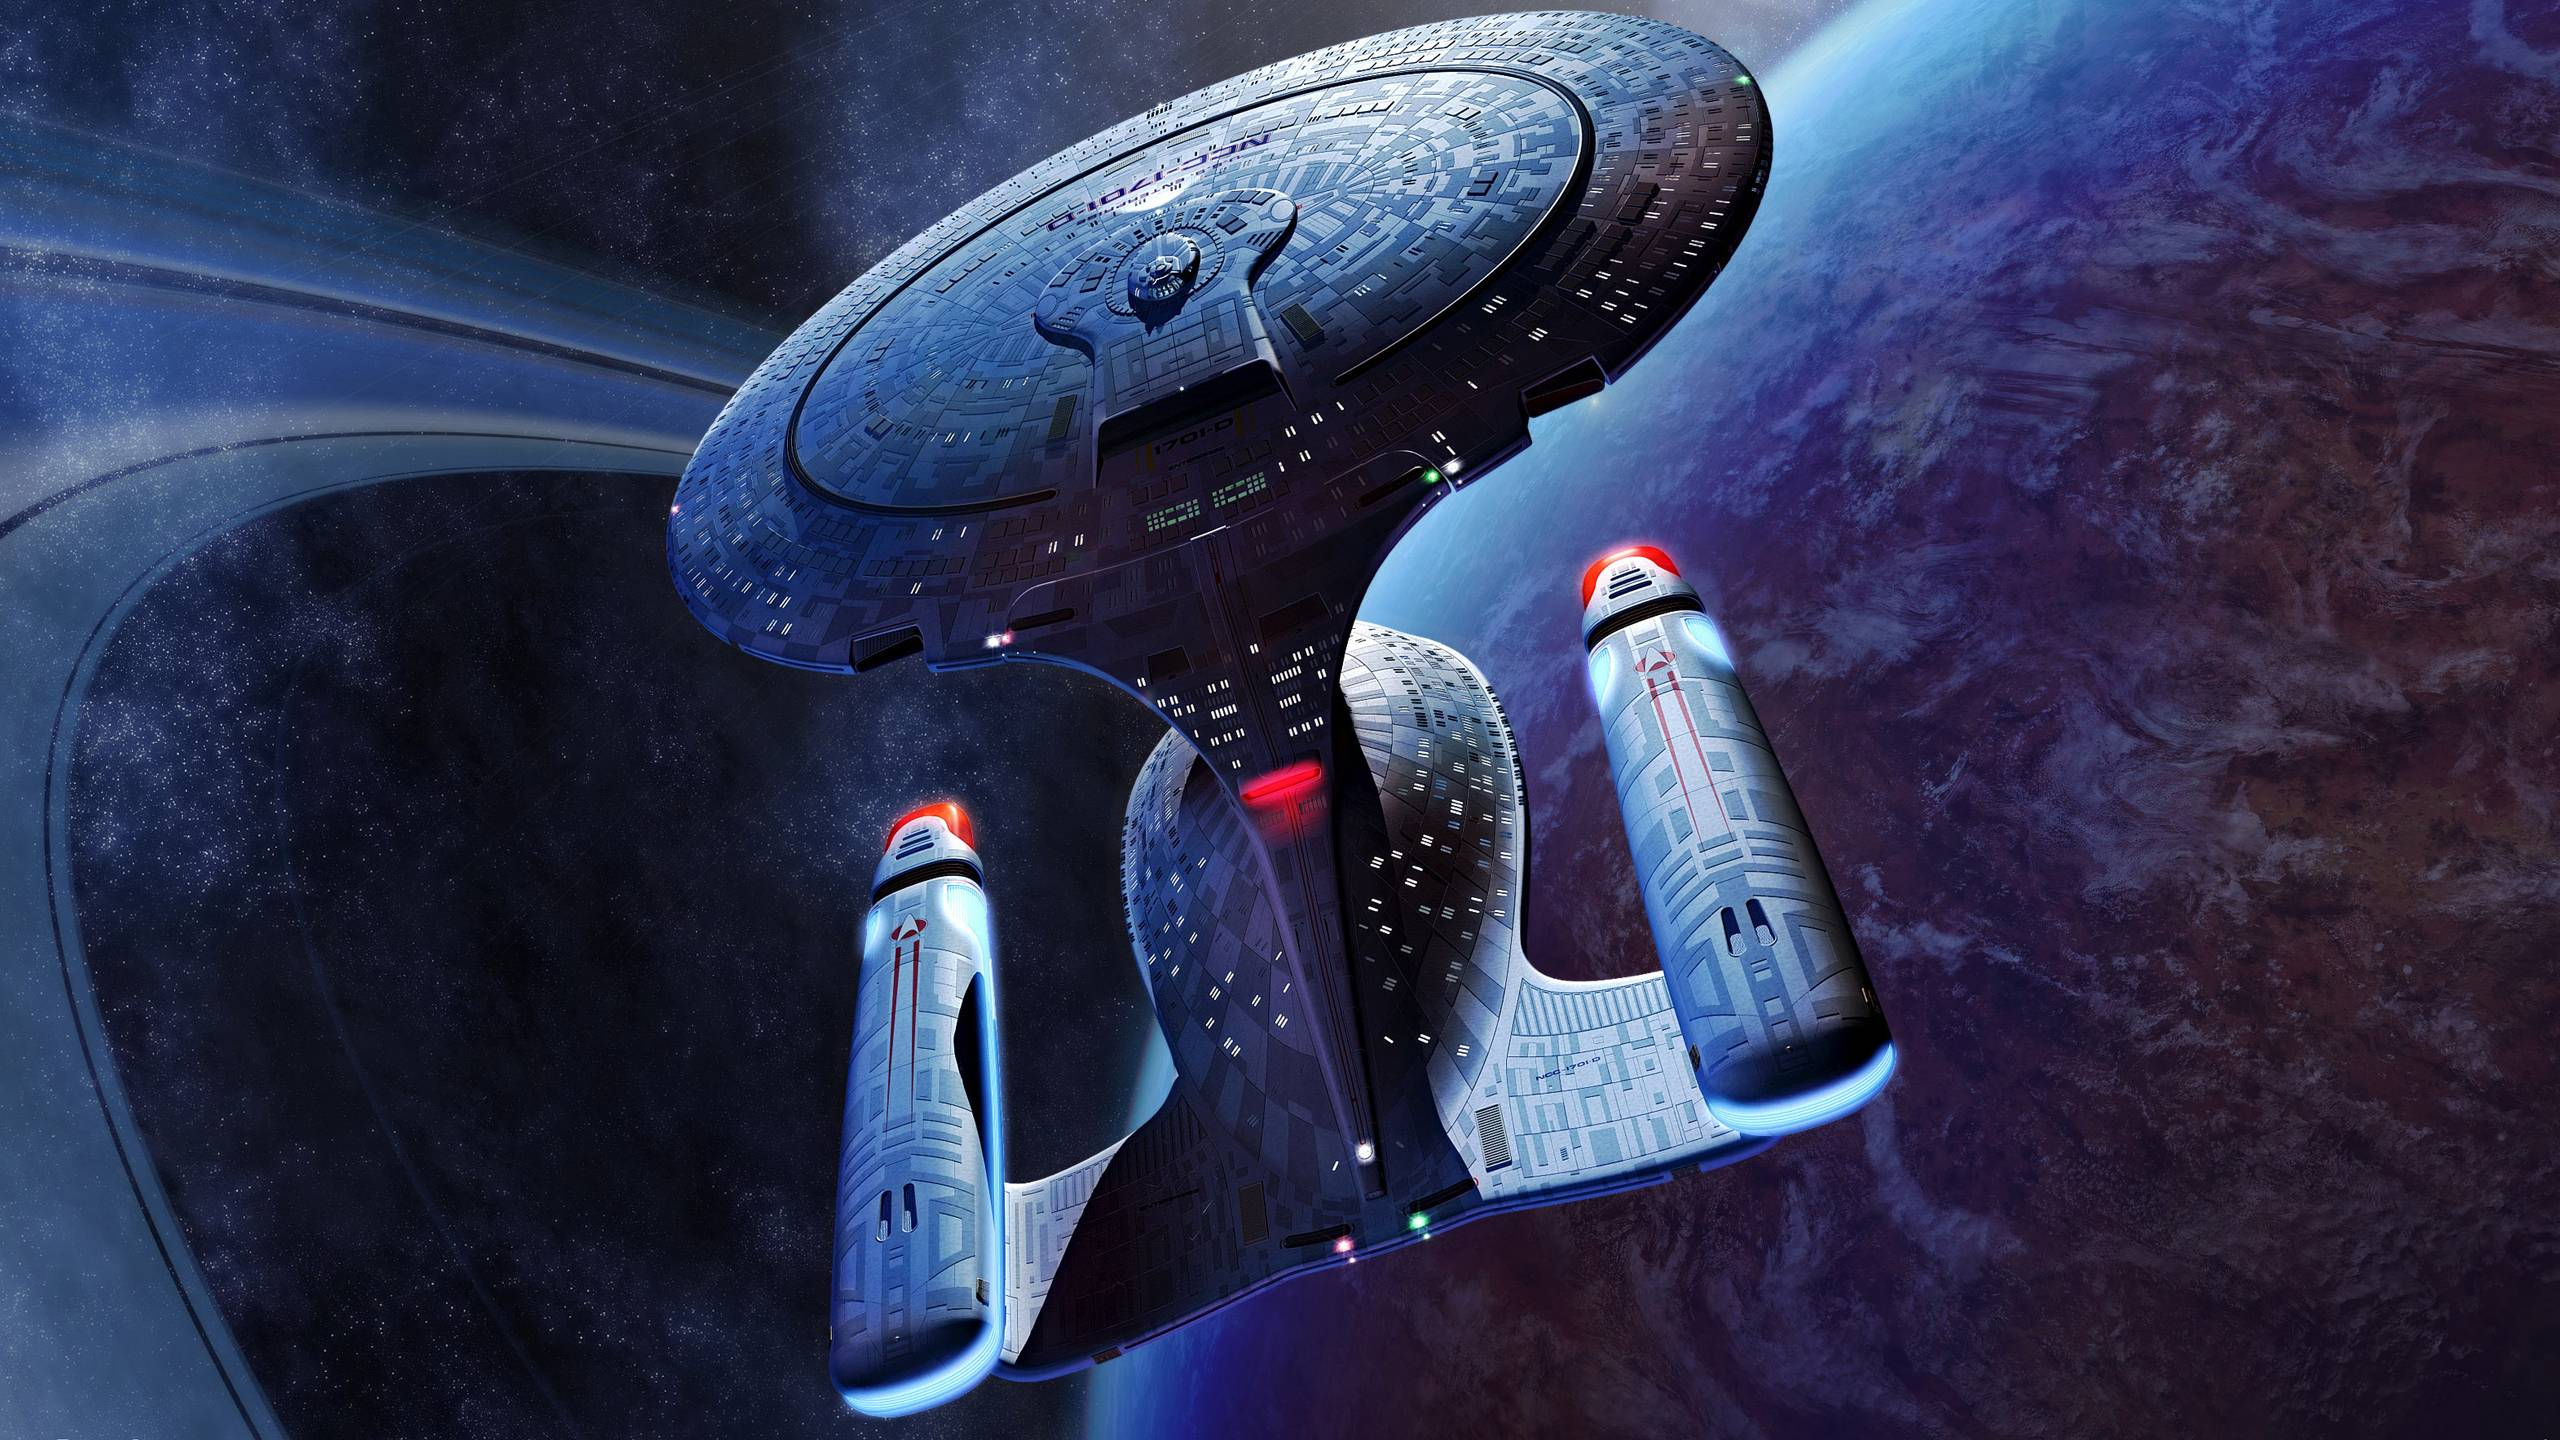 2560x1440 60+ Star Trek: The Next Generation HD Wallpapers and Backgrounds